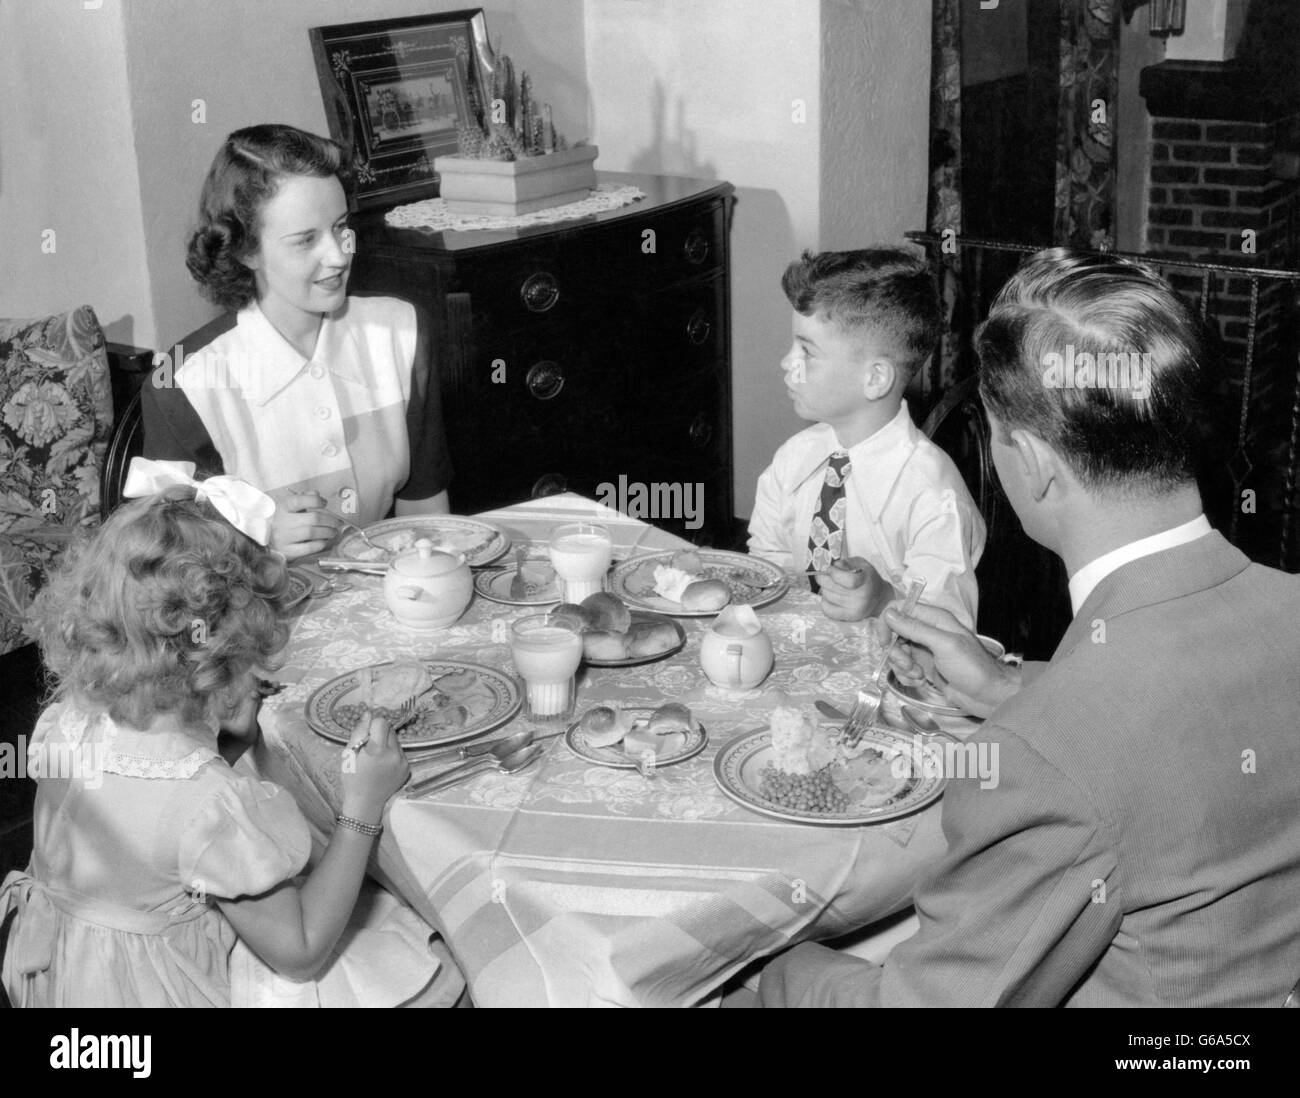 1940s 1950s FAMILY MOTHER FATHER BOY GIRL EATING SUPPER AT DINING TABLE Stock Photo